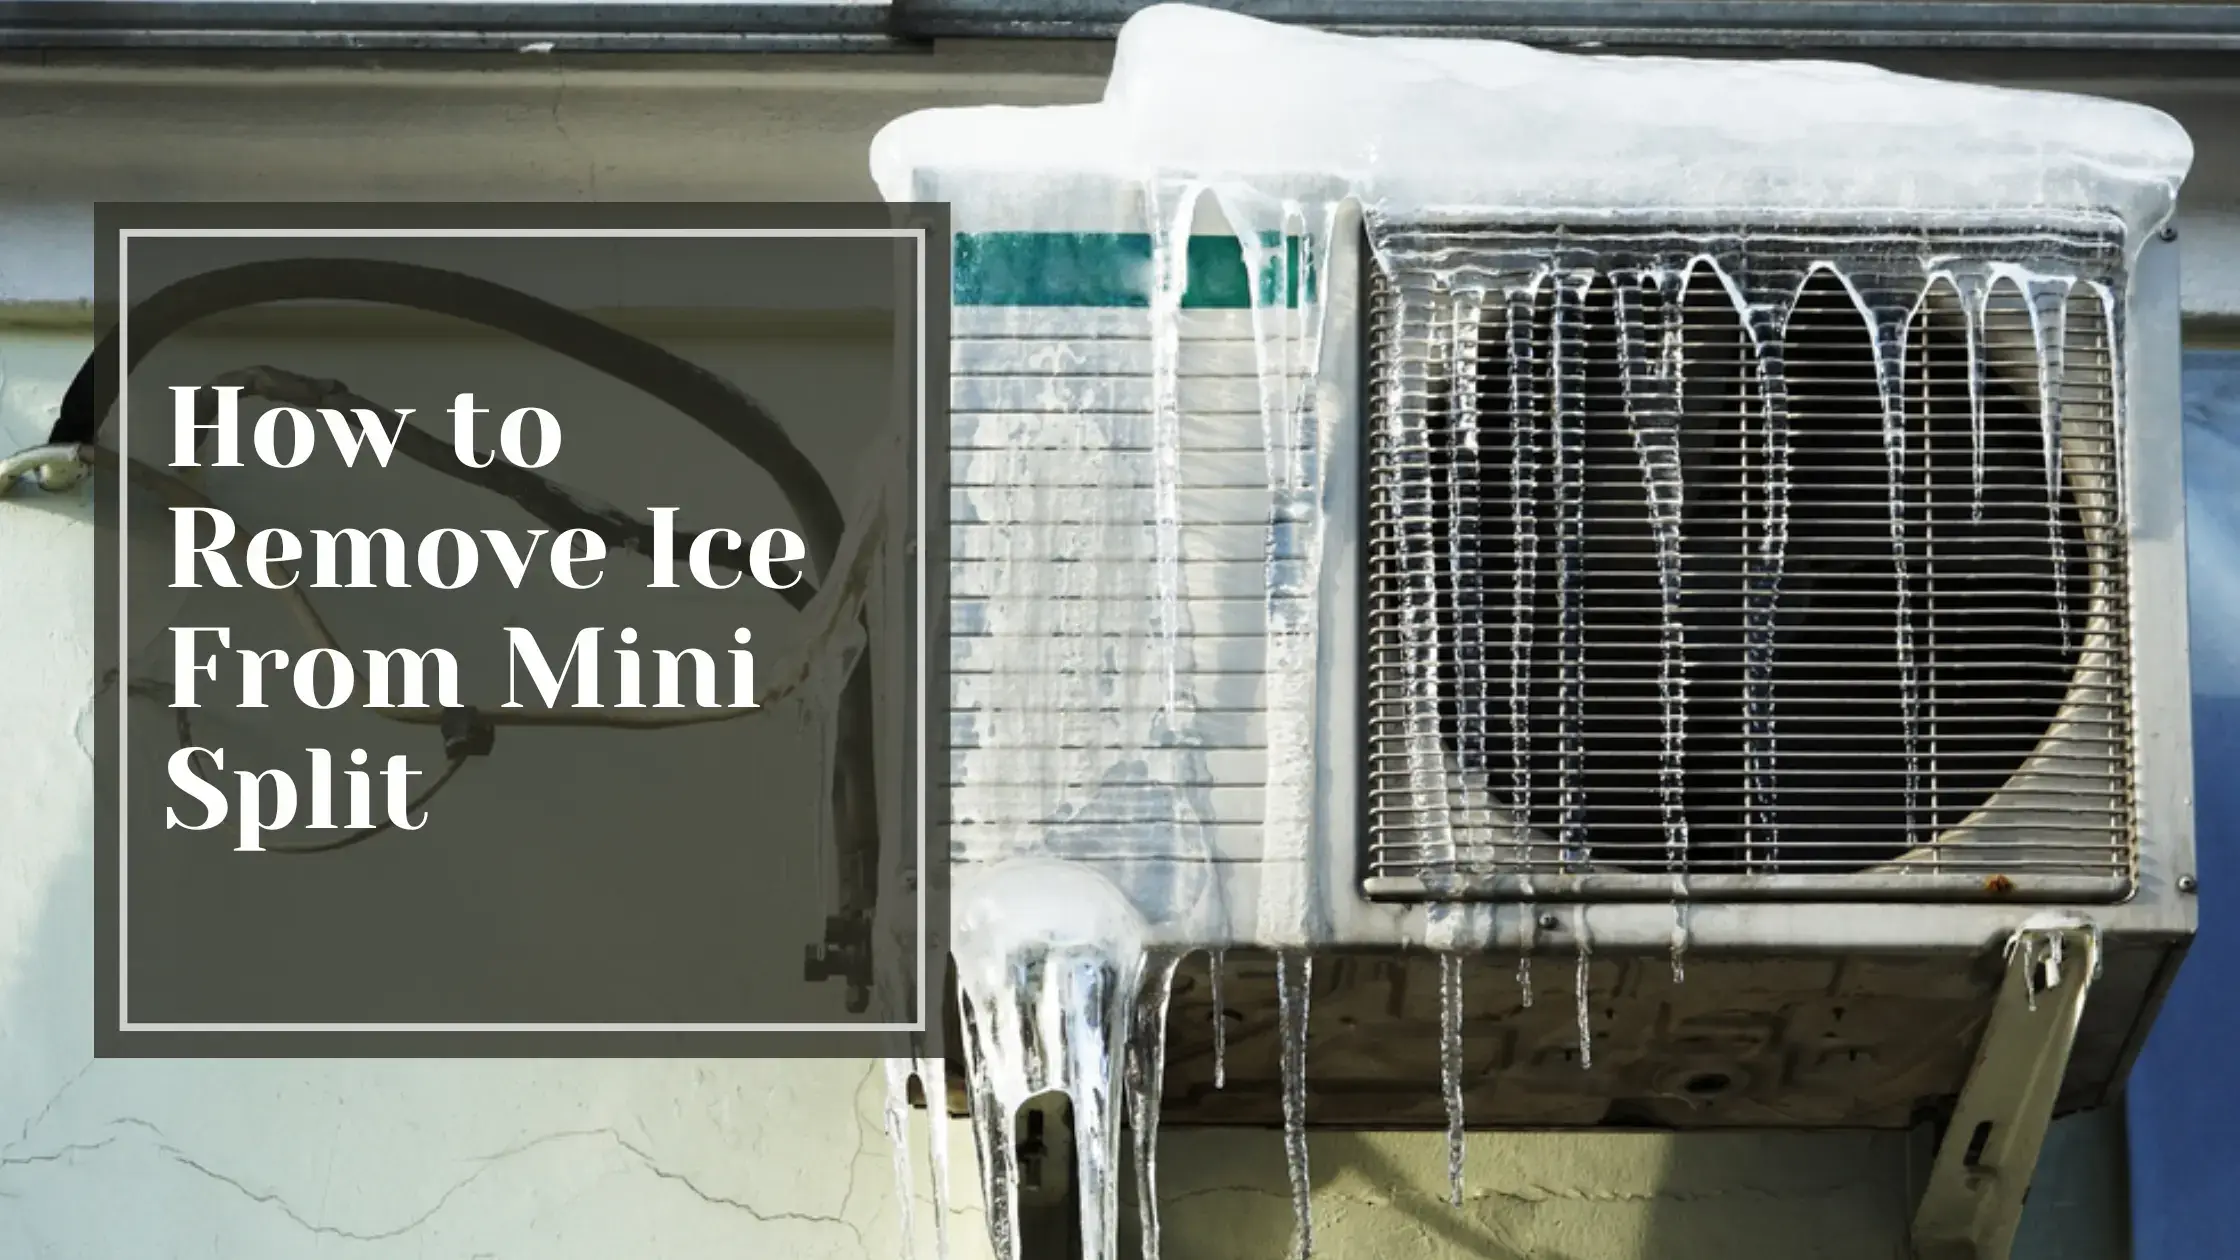 How to Remove Ice From Mini Split